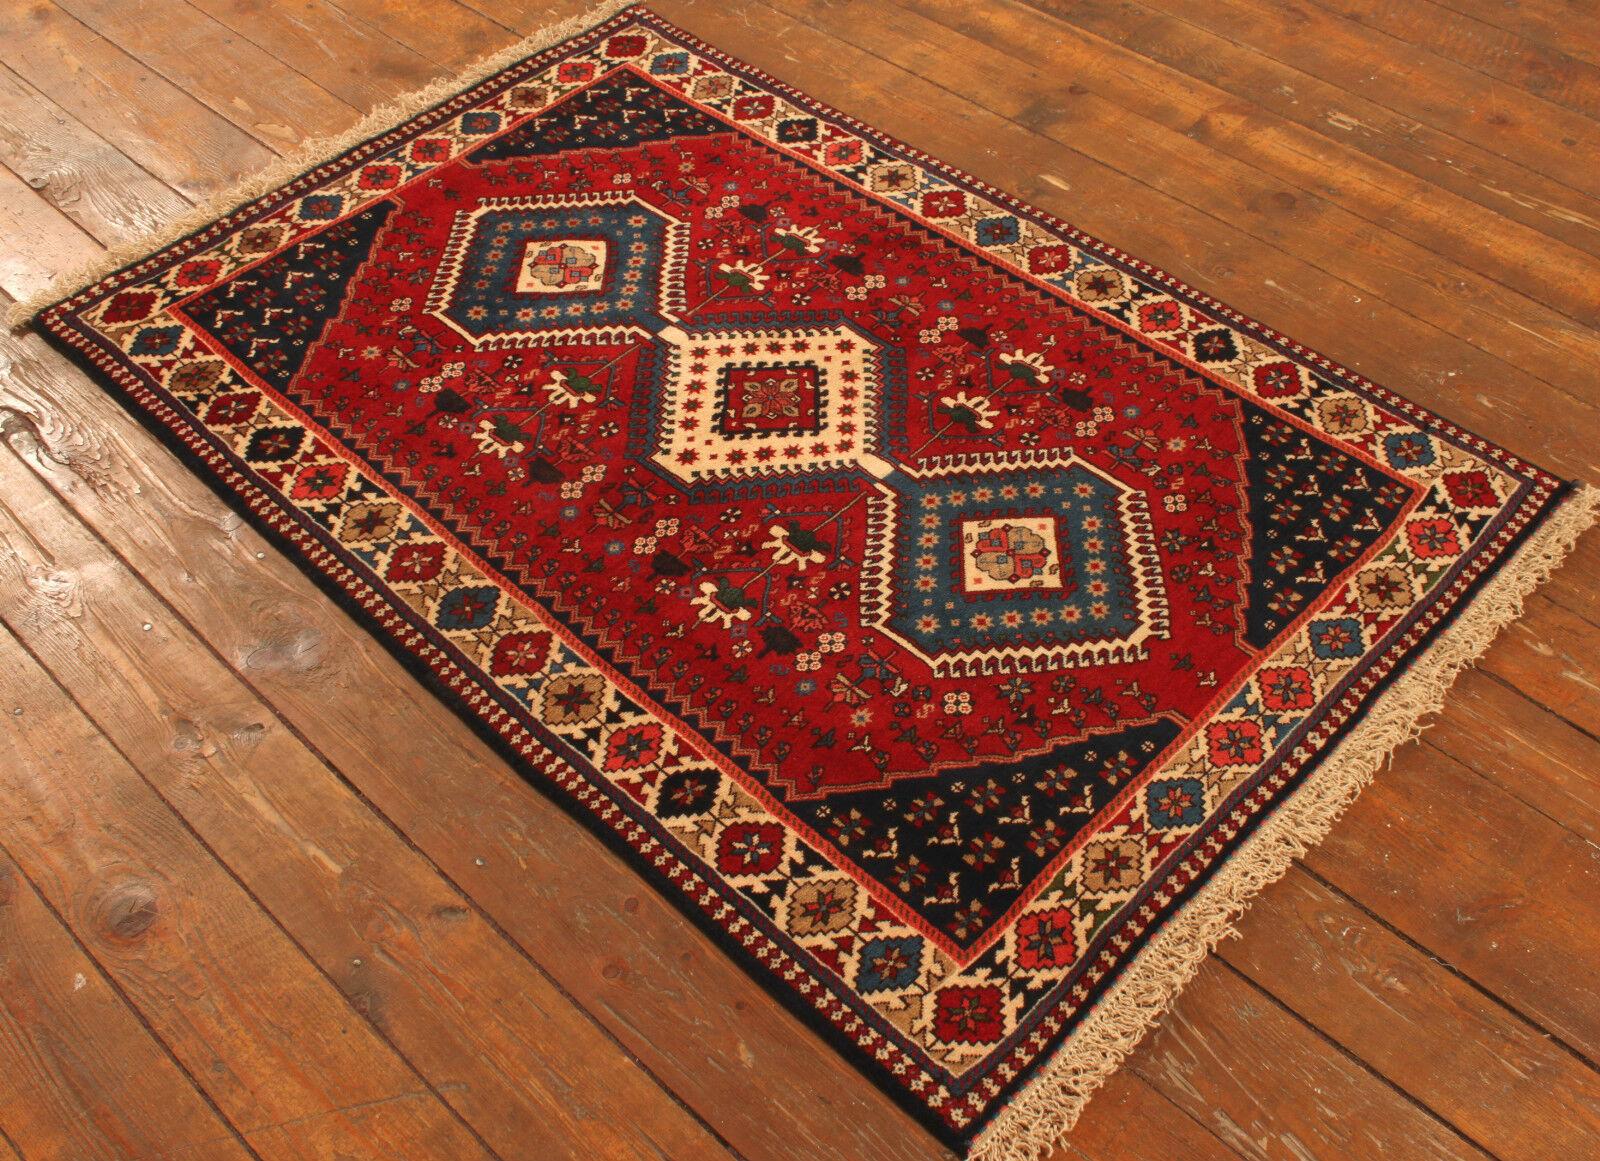 Handmade Vintage Persian Style Yalameh Rug 3.4' x 5.2', 1990s - 1T22 For Sale 1